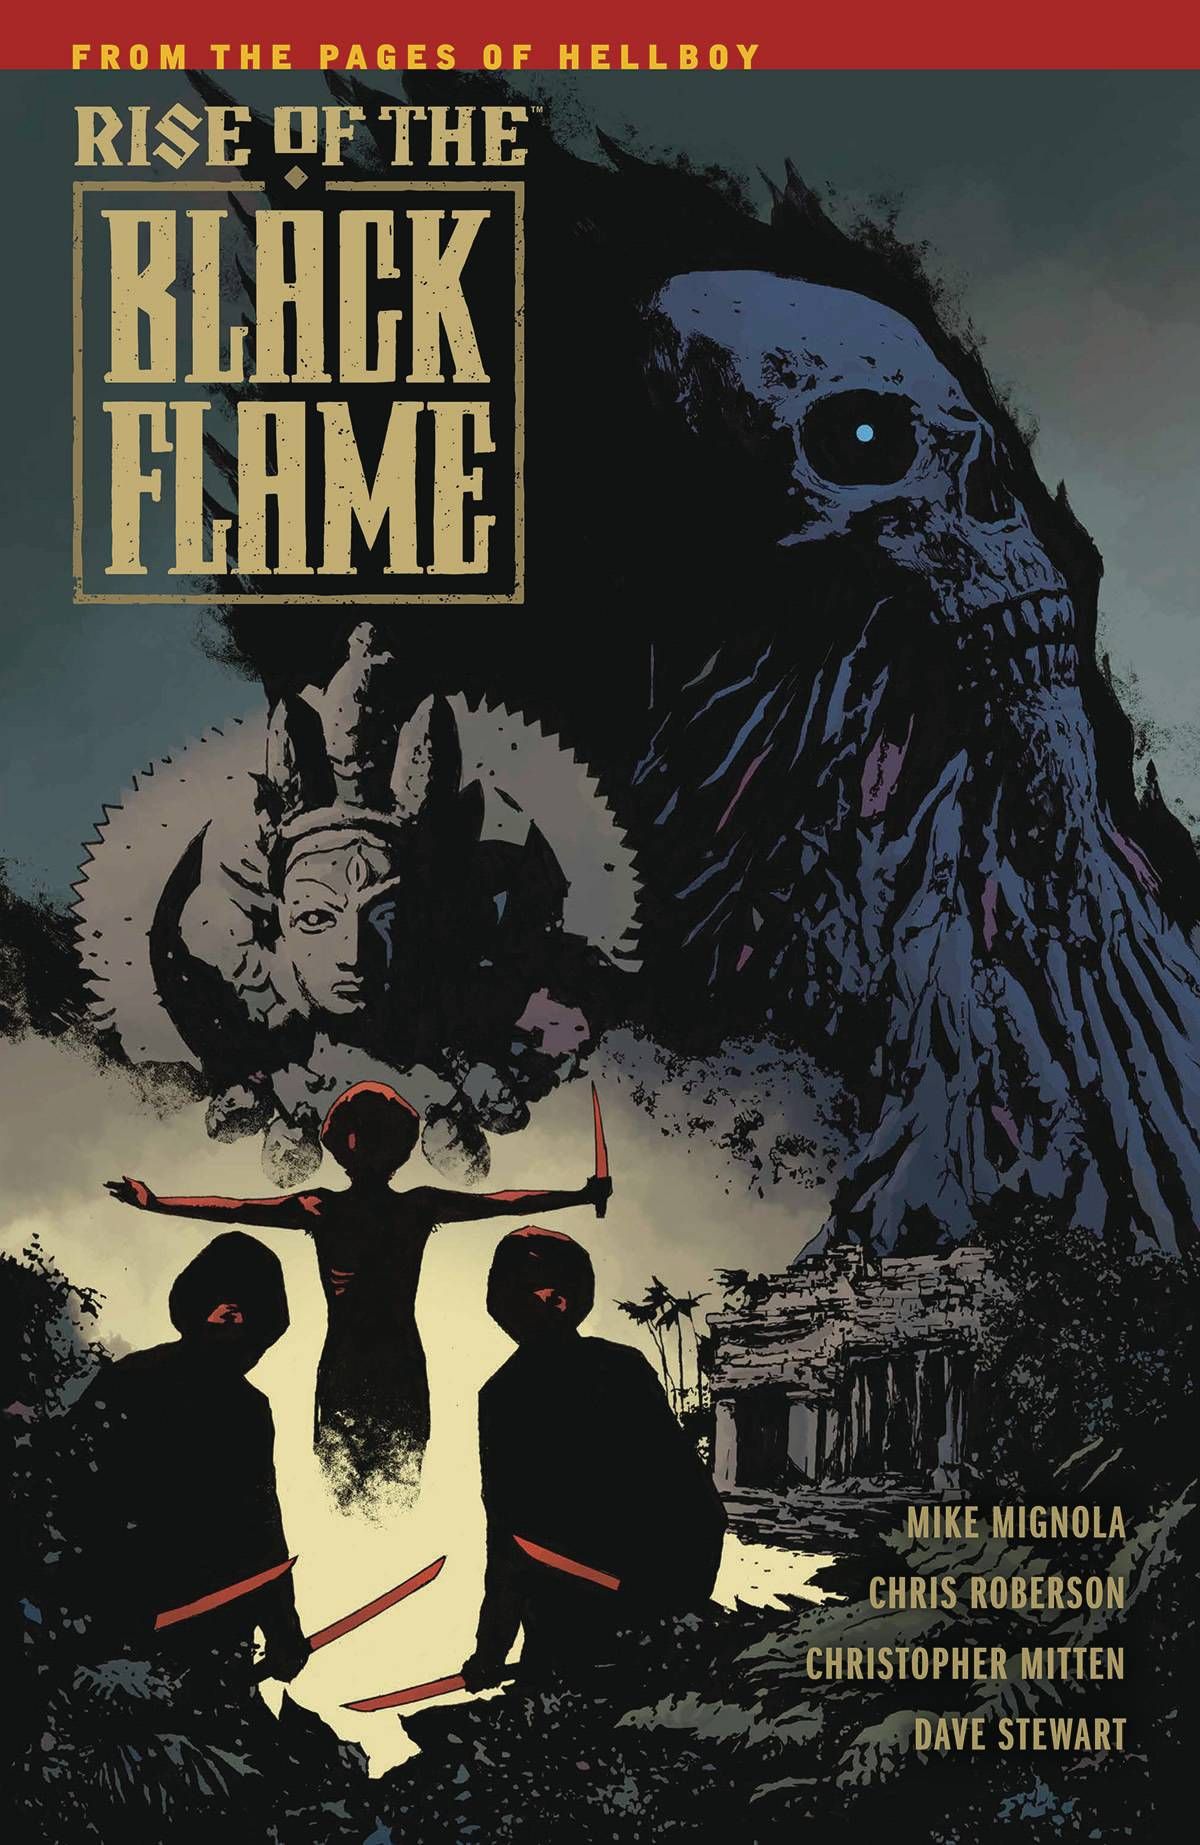 Rise of the Black Flame #1 Comic